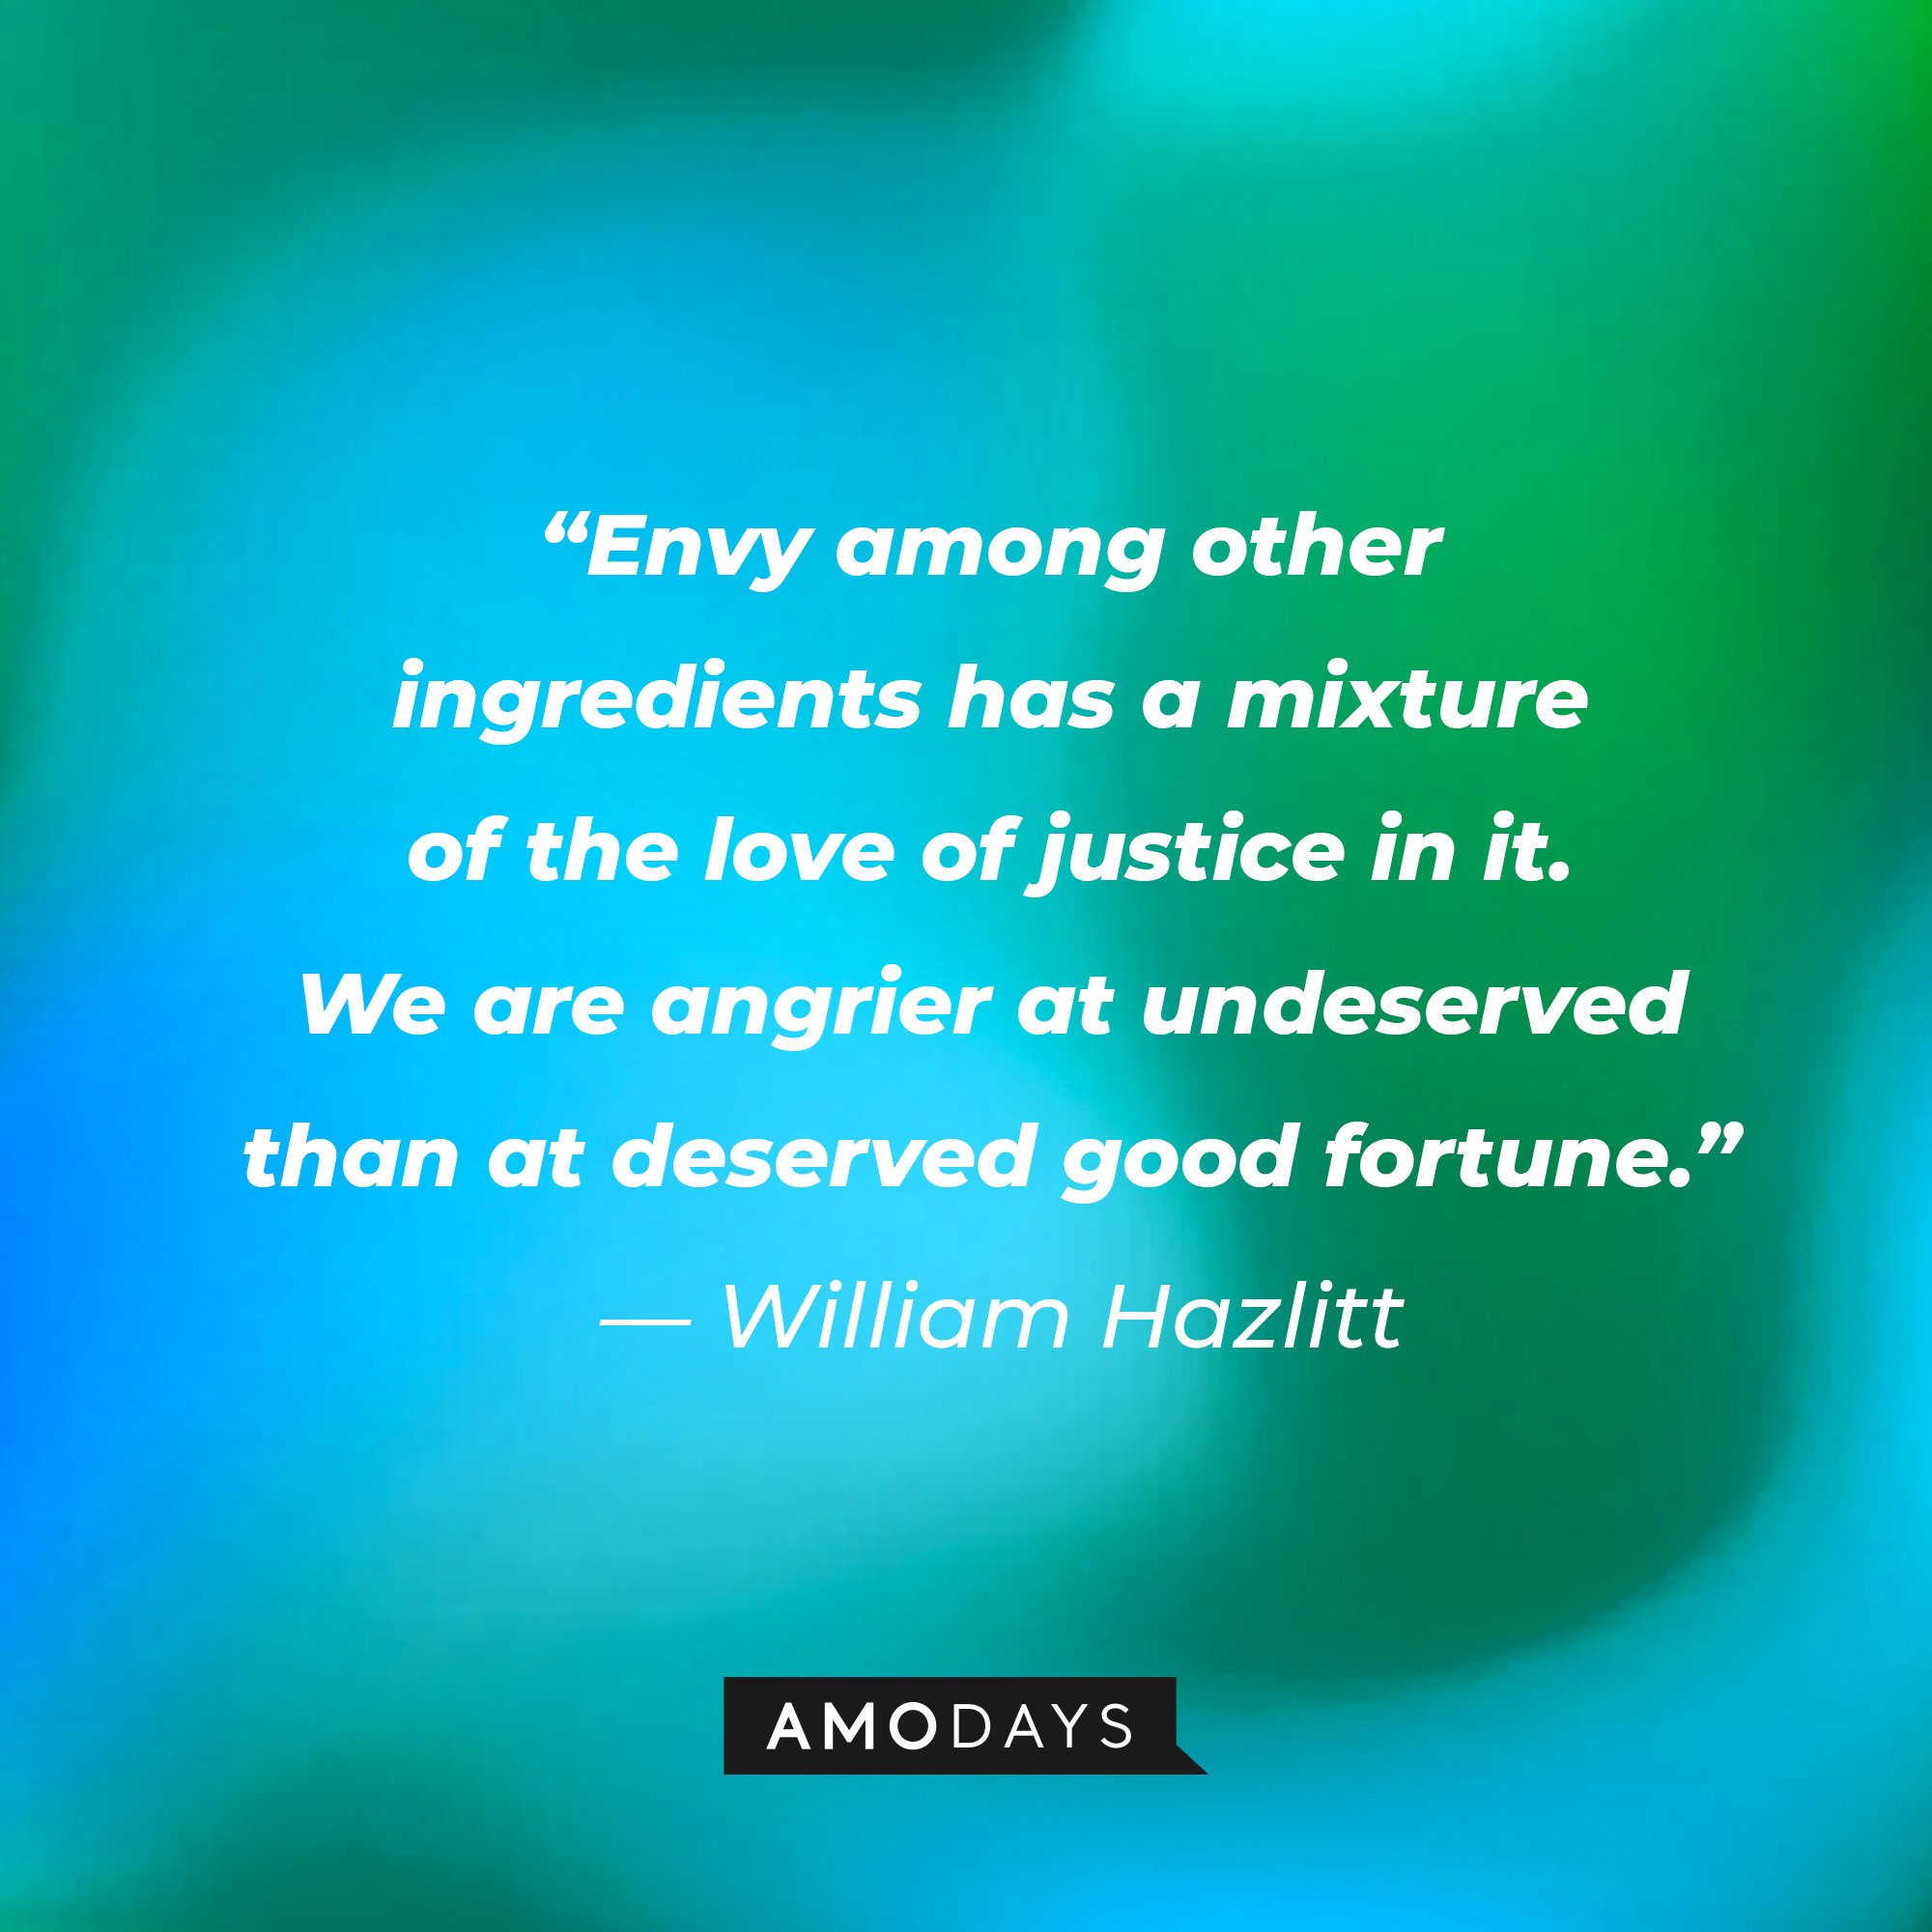  William Hazlitt's quote: “Envy among other ingredients has a mixture of the love of justice in it. We are angrier at undeserved than at deserved good fortune.” | Image: AmoDays